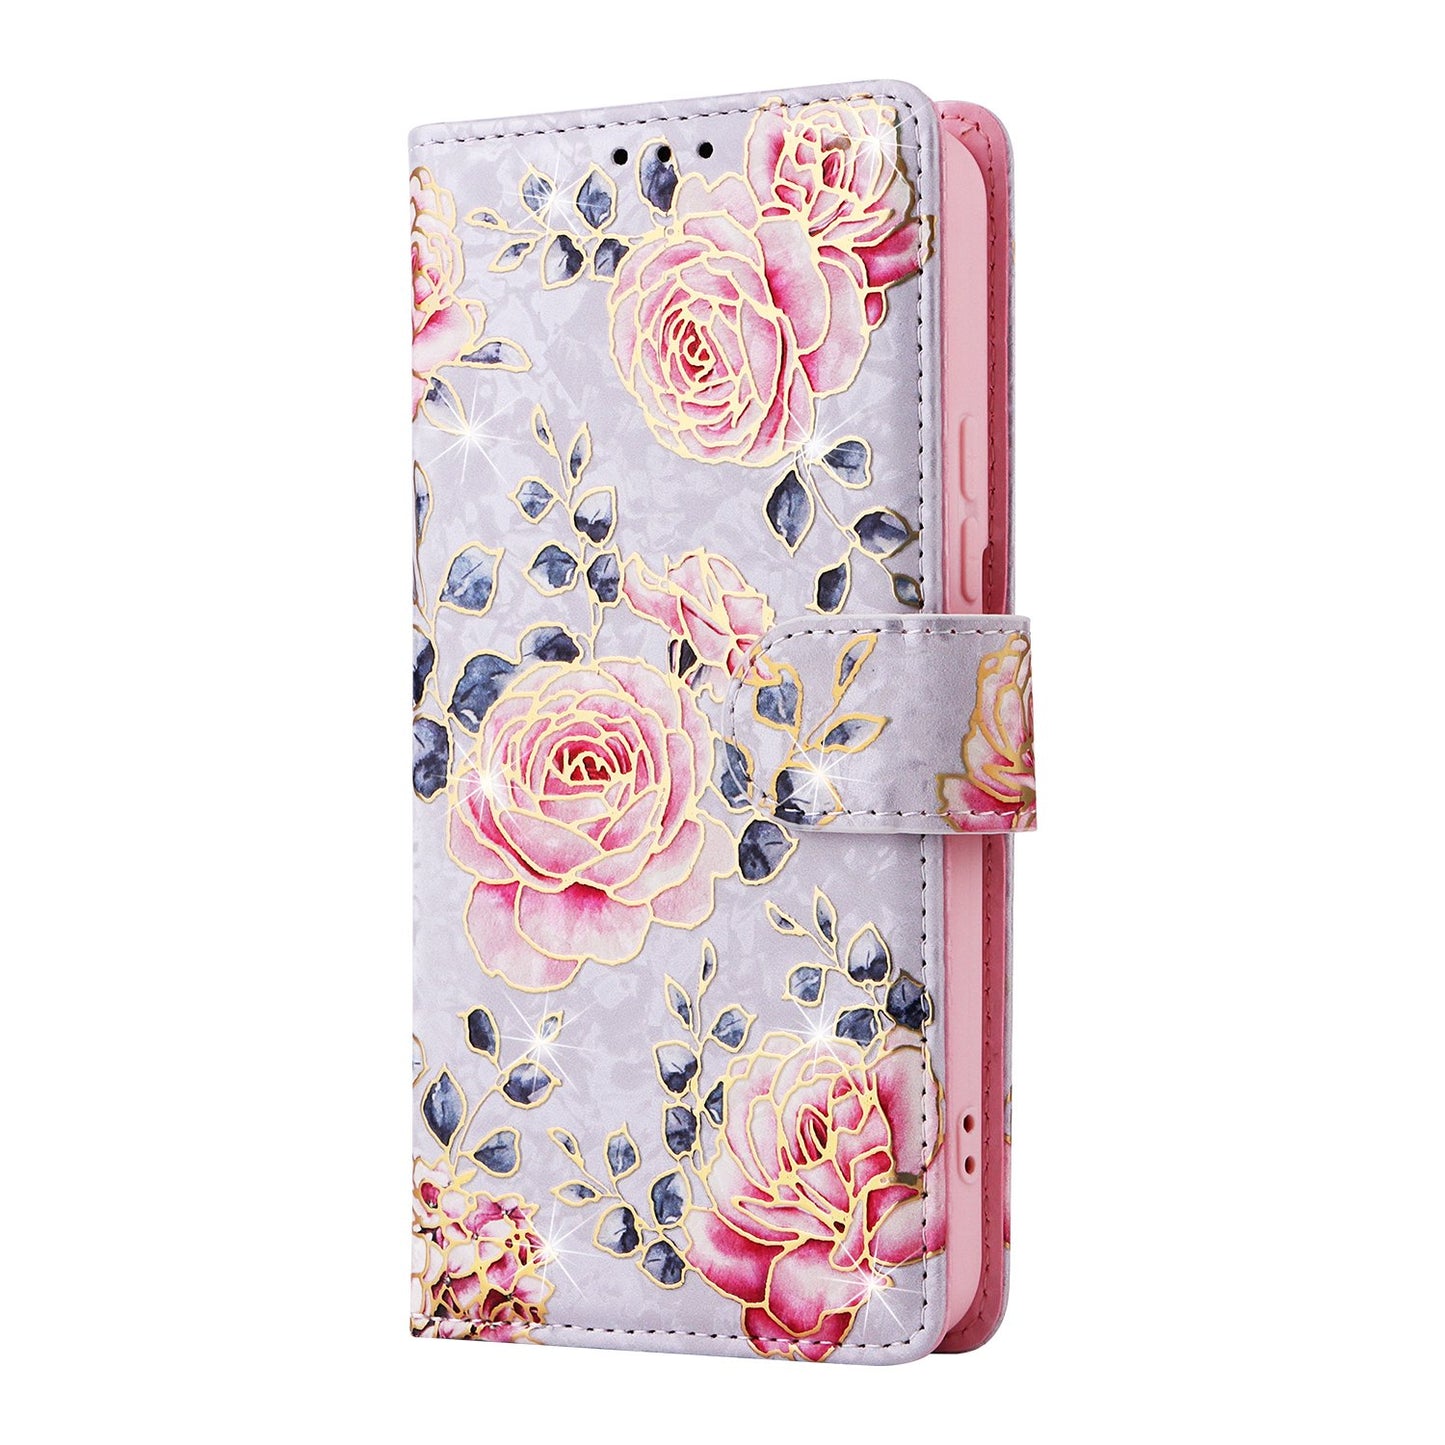 Flower Patterned Flip Leather Phone Case With FRID Anti-theft Function For Samsung Galaxy S23 S22 S21 S20 Ultra/S23 S22 S21 S20 Plus/S23 S22 S21 S20/S21 FE/S20 FE/S10 Plus/S10/S9 Plus/S9/S8 Plus/S8 Card Slots Holder Wallet Case